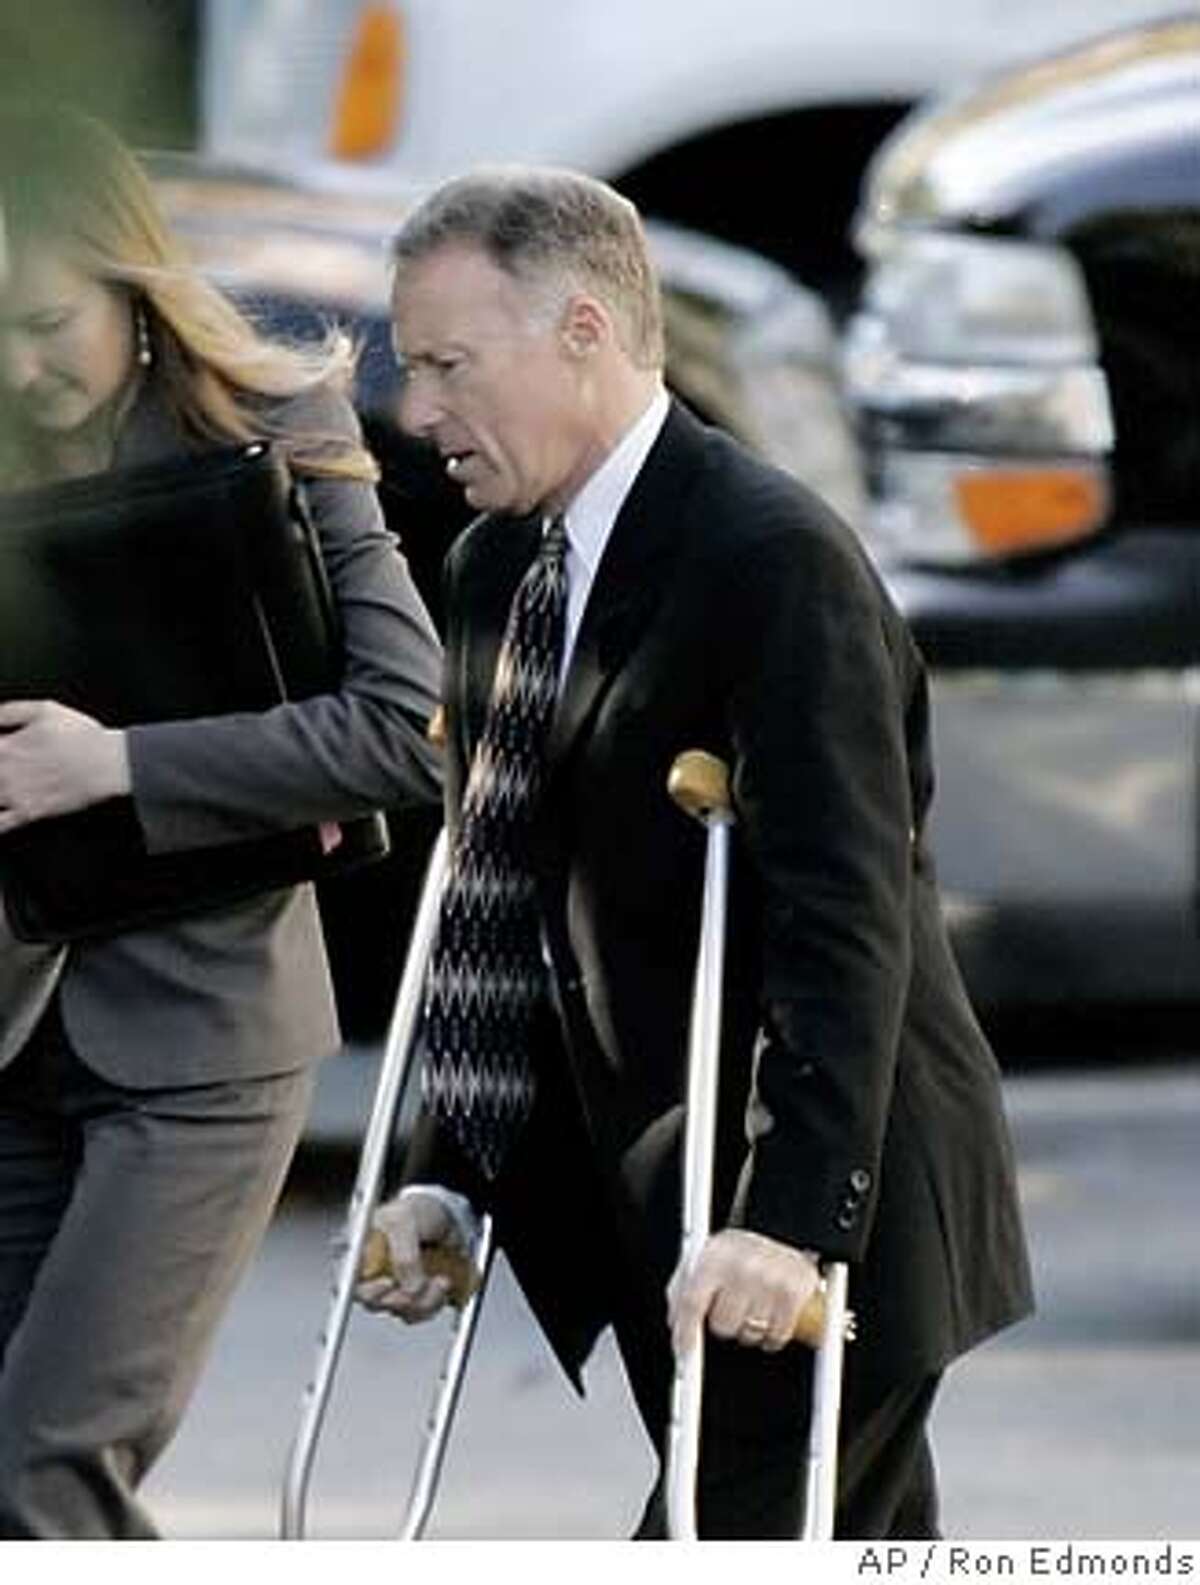 Vice President Dick Cheney's chief of staff, I. Lewis "Scooter" Libby, walks into the White House, Wednesday, Oct. 26, 2005, using crutches. Lawyers representing key White House officials expect Special Counsel Patrick Fitzgerald to decide this week whether to charge Libby and top presidential political adviser Karl Rove in the leak of a CIA officer's identity. (AP Photo/Ron Edmonds)